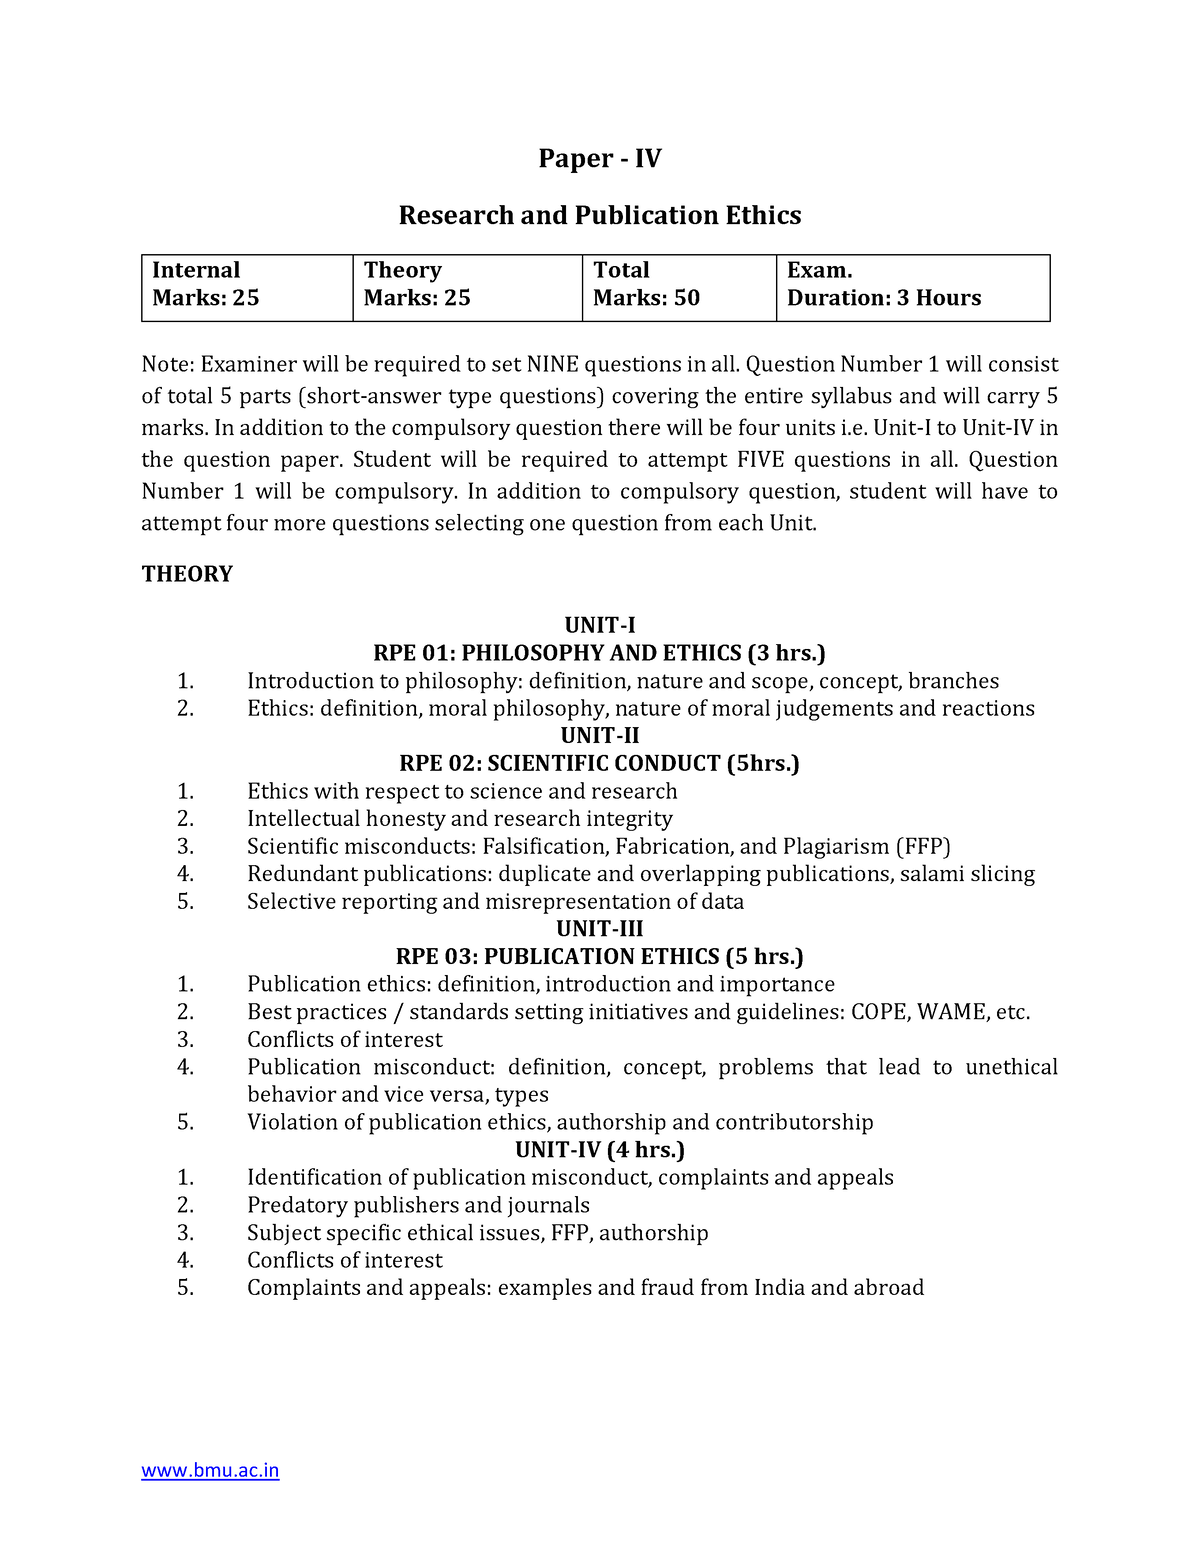 research methodology and publication ethics question paper